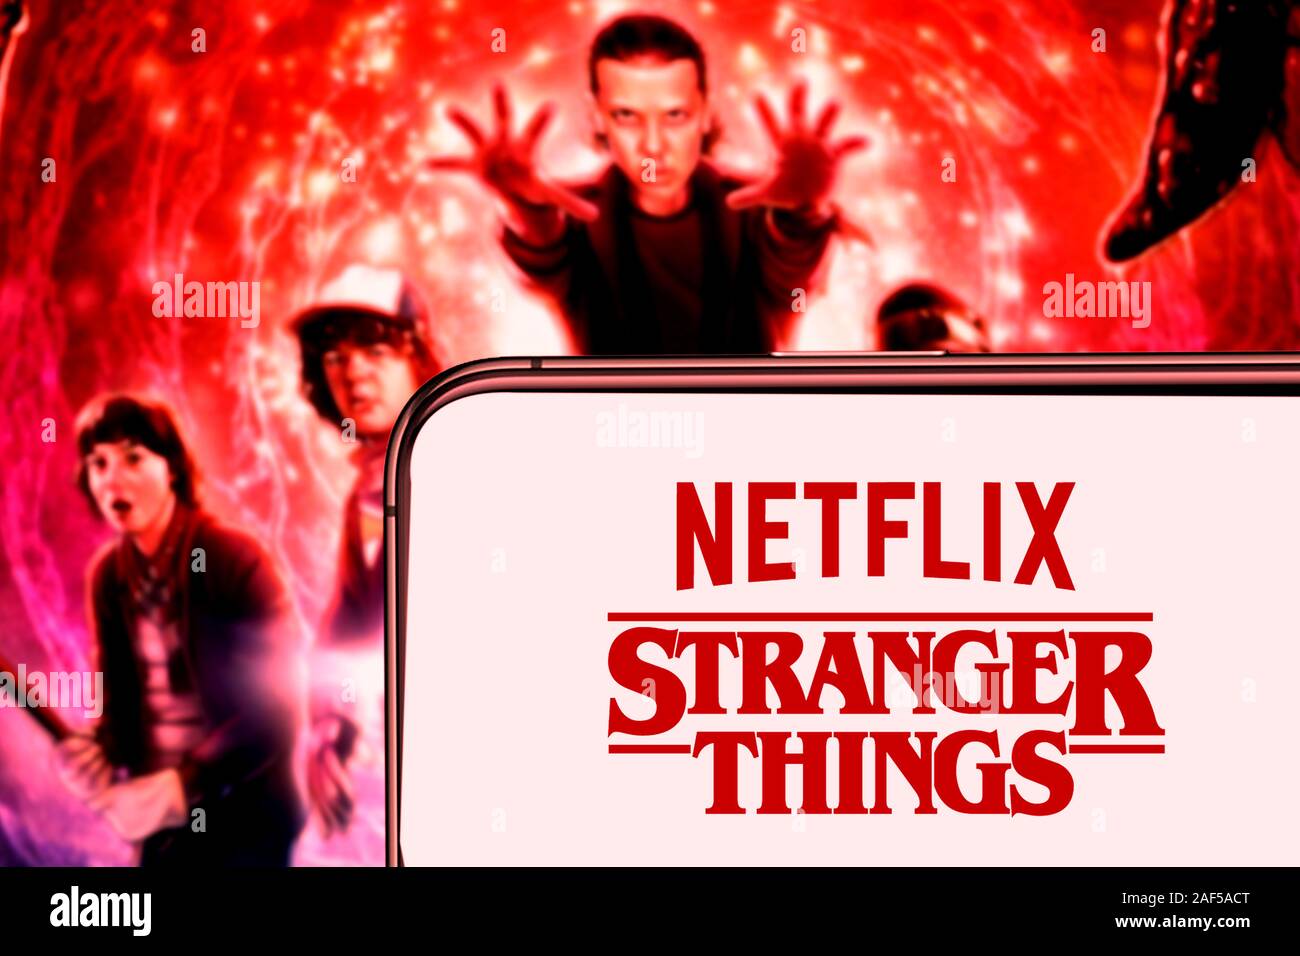 United States, New York. Sunday, September 29, 2019.Computer keyboard with the Iphone 11 pro with the Stranger Things logo. Stranger Things is an Amer Stock Photo